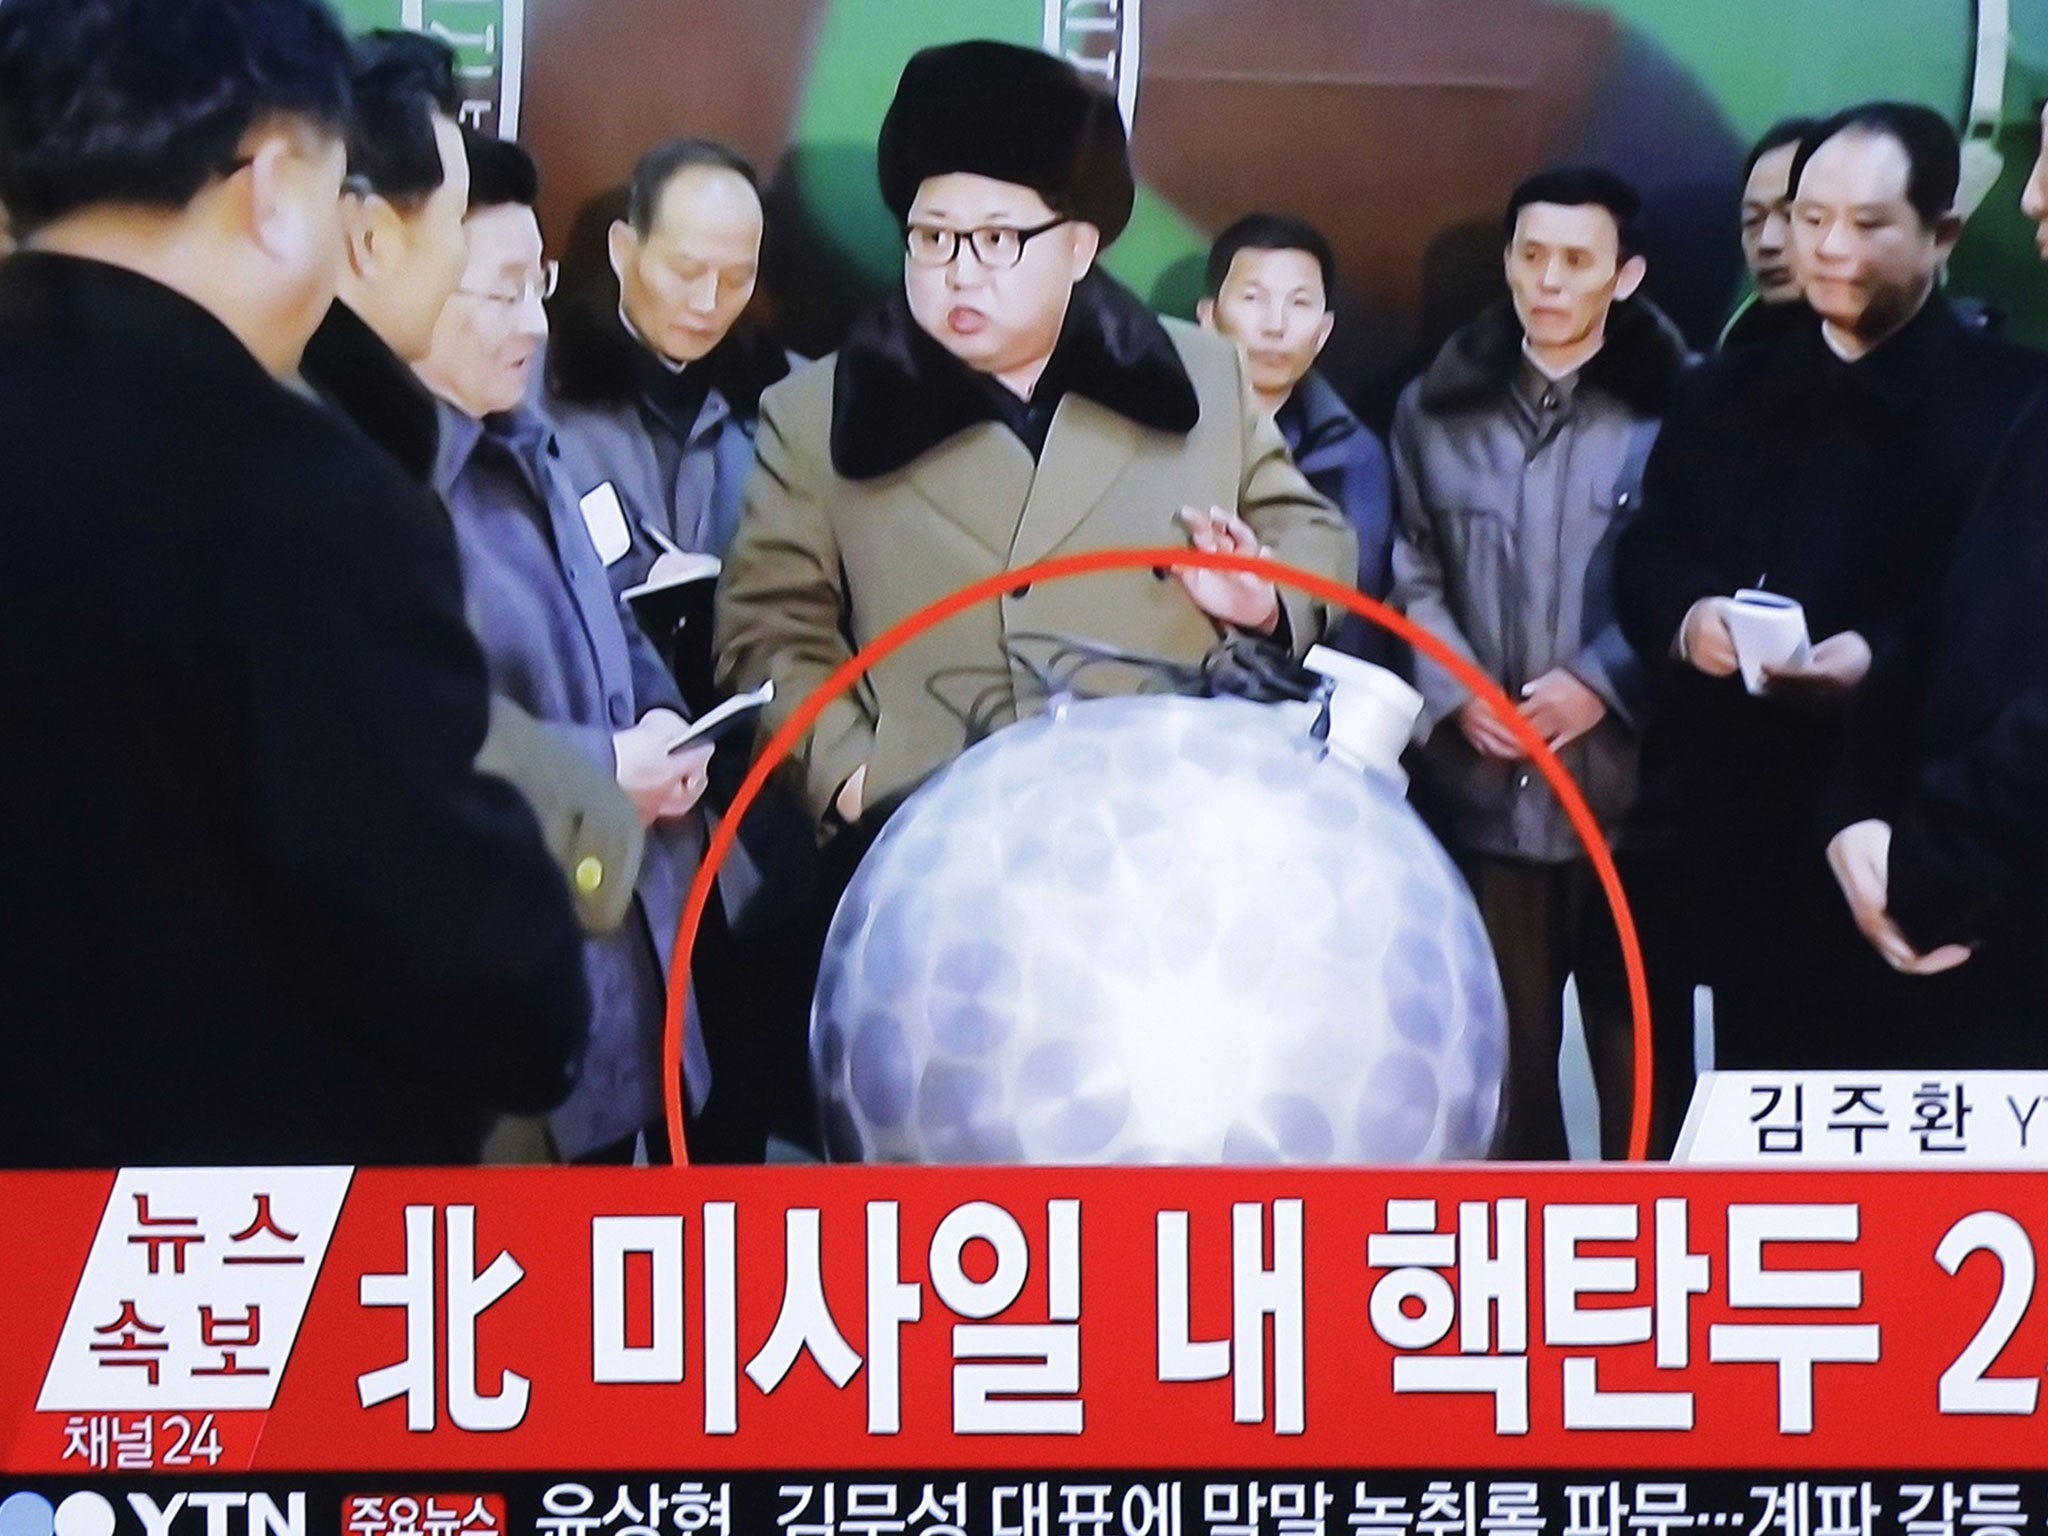 Kim declared he was greatly pleased that warheads had been miniaturised for use on ballistic missiles